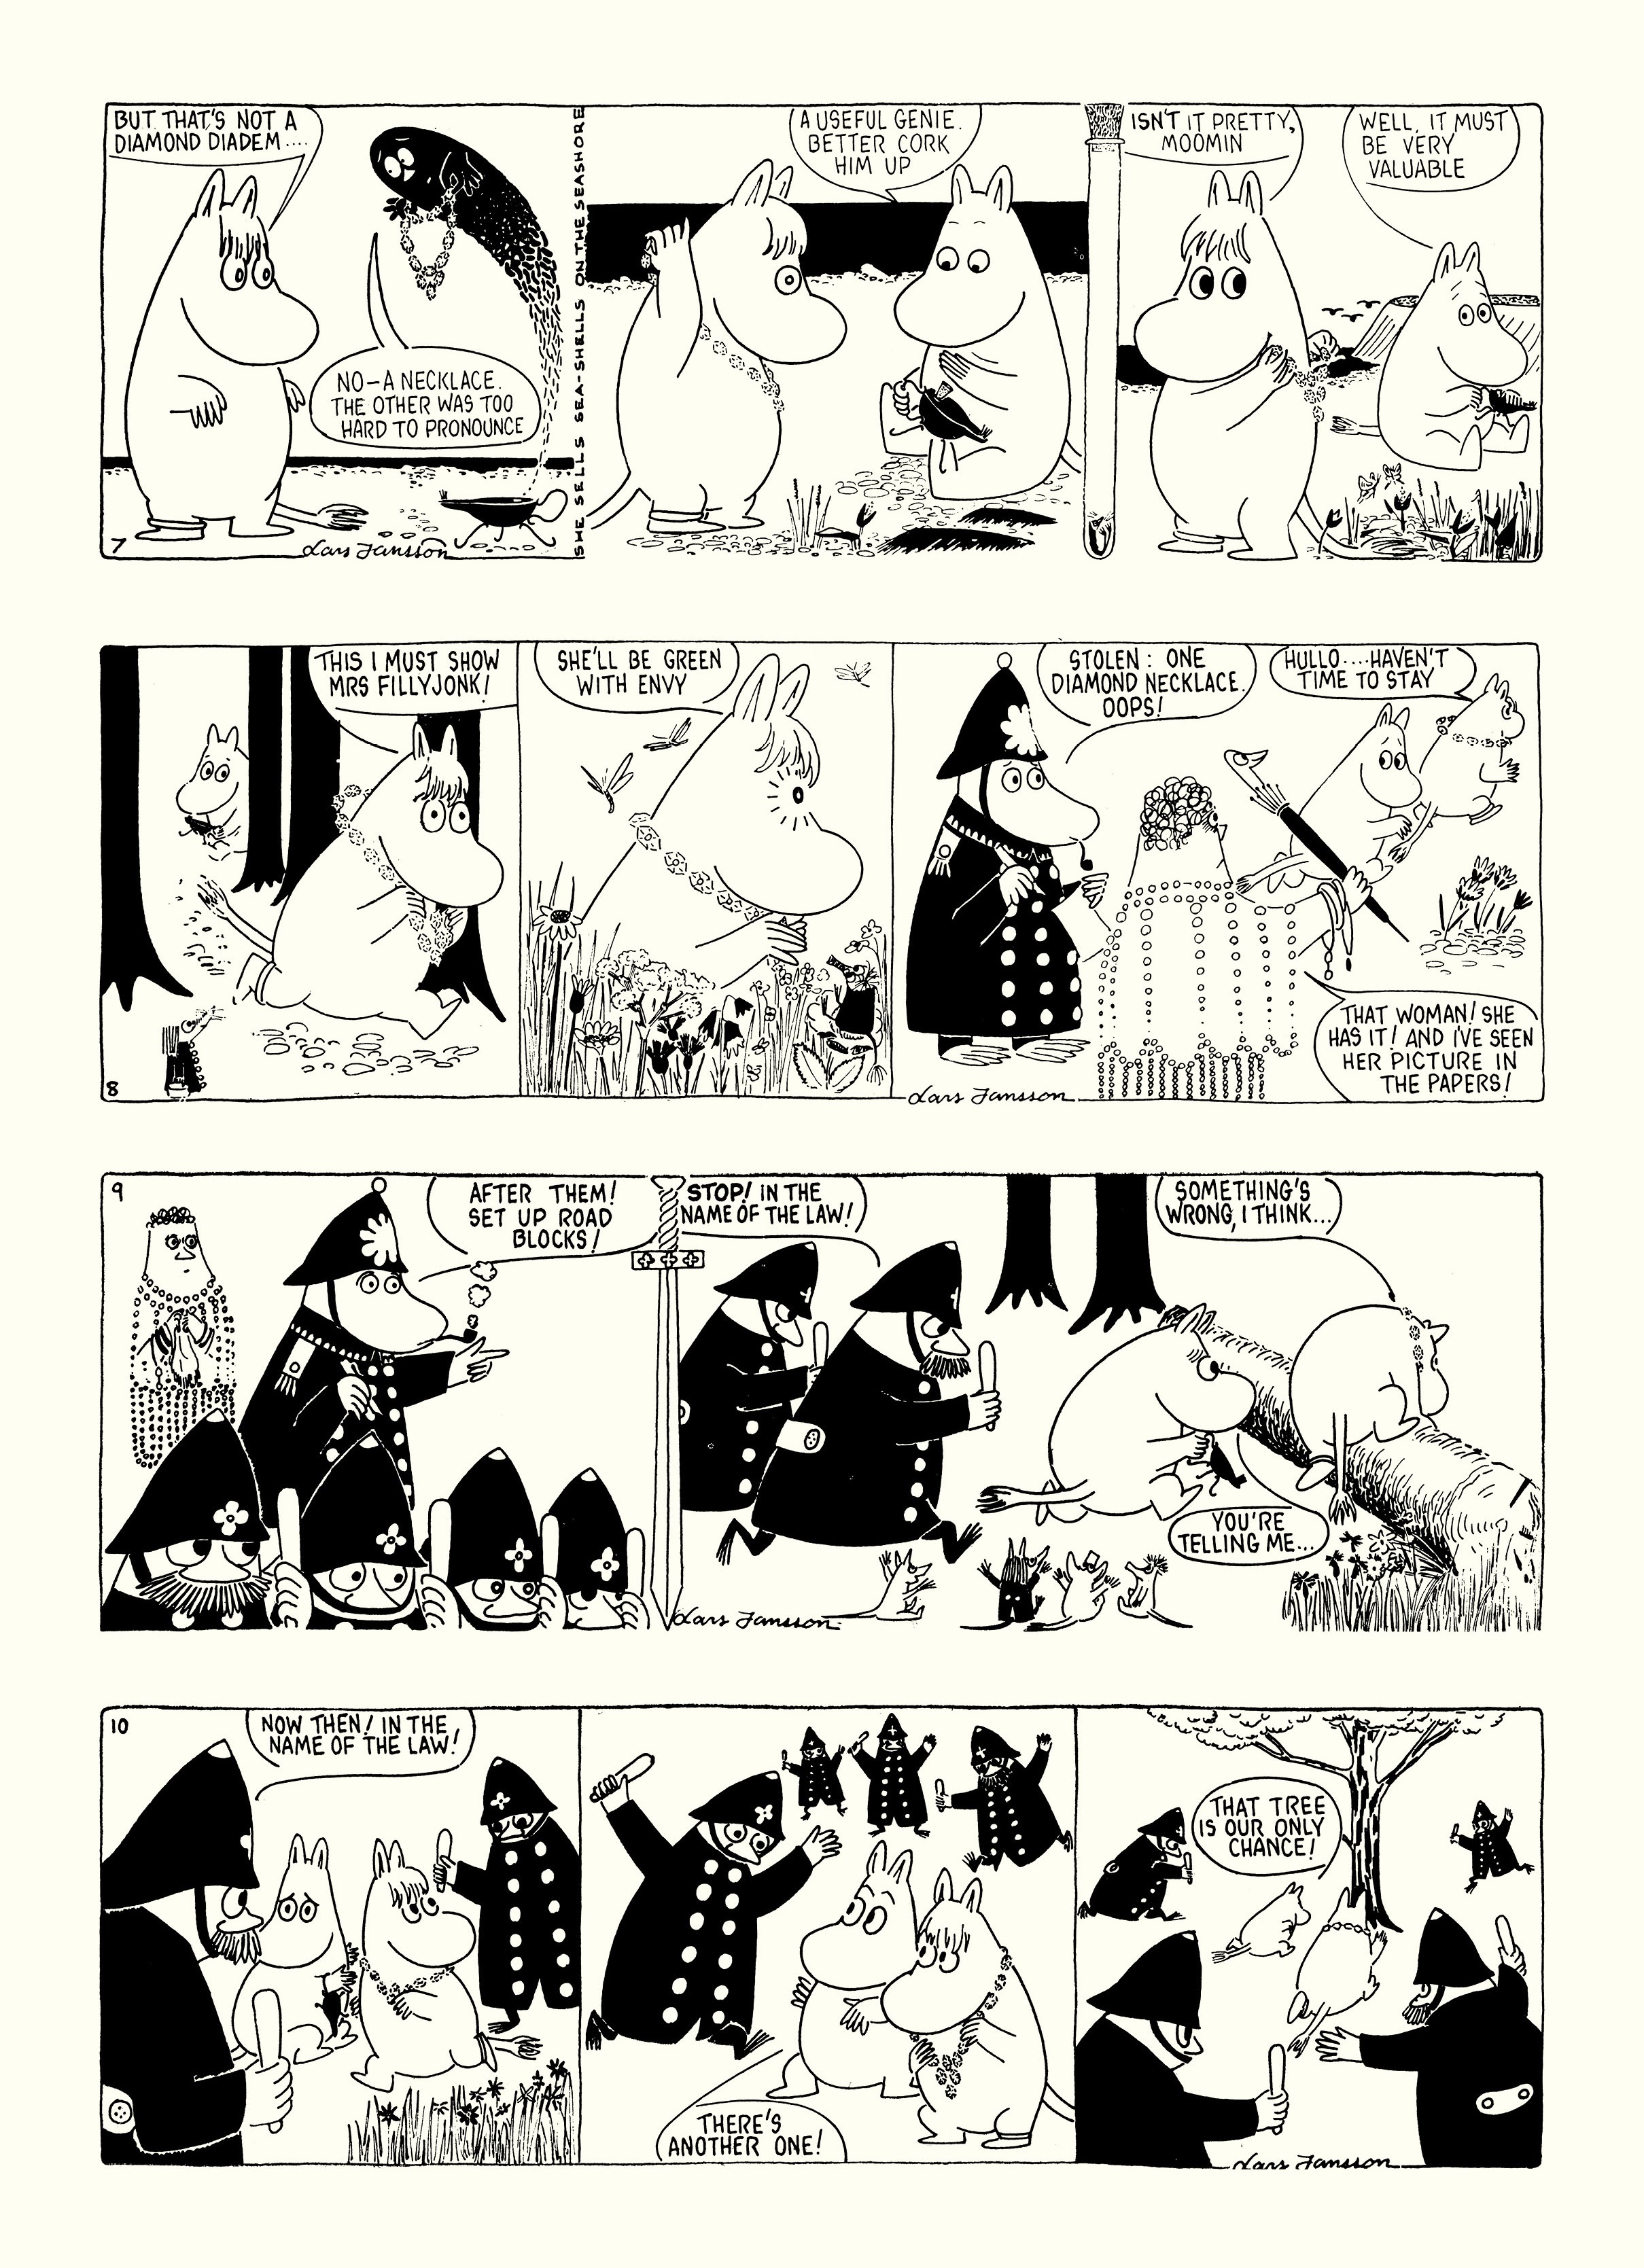 Read online Moomin: The Complete Lars Jansson Comic Strip comic -  Issue # TPB 6 - 8